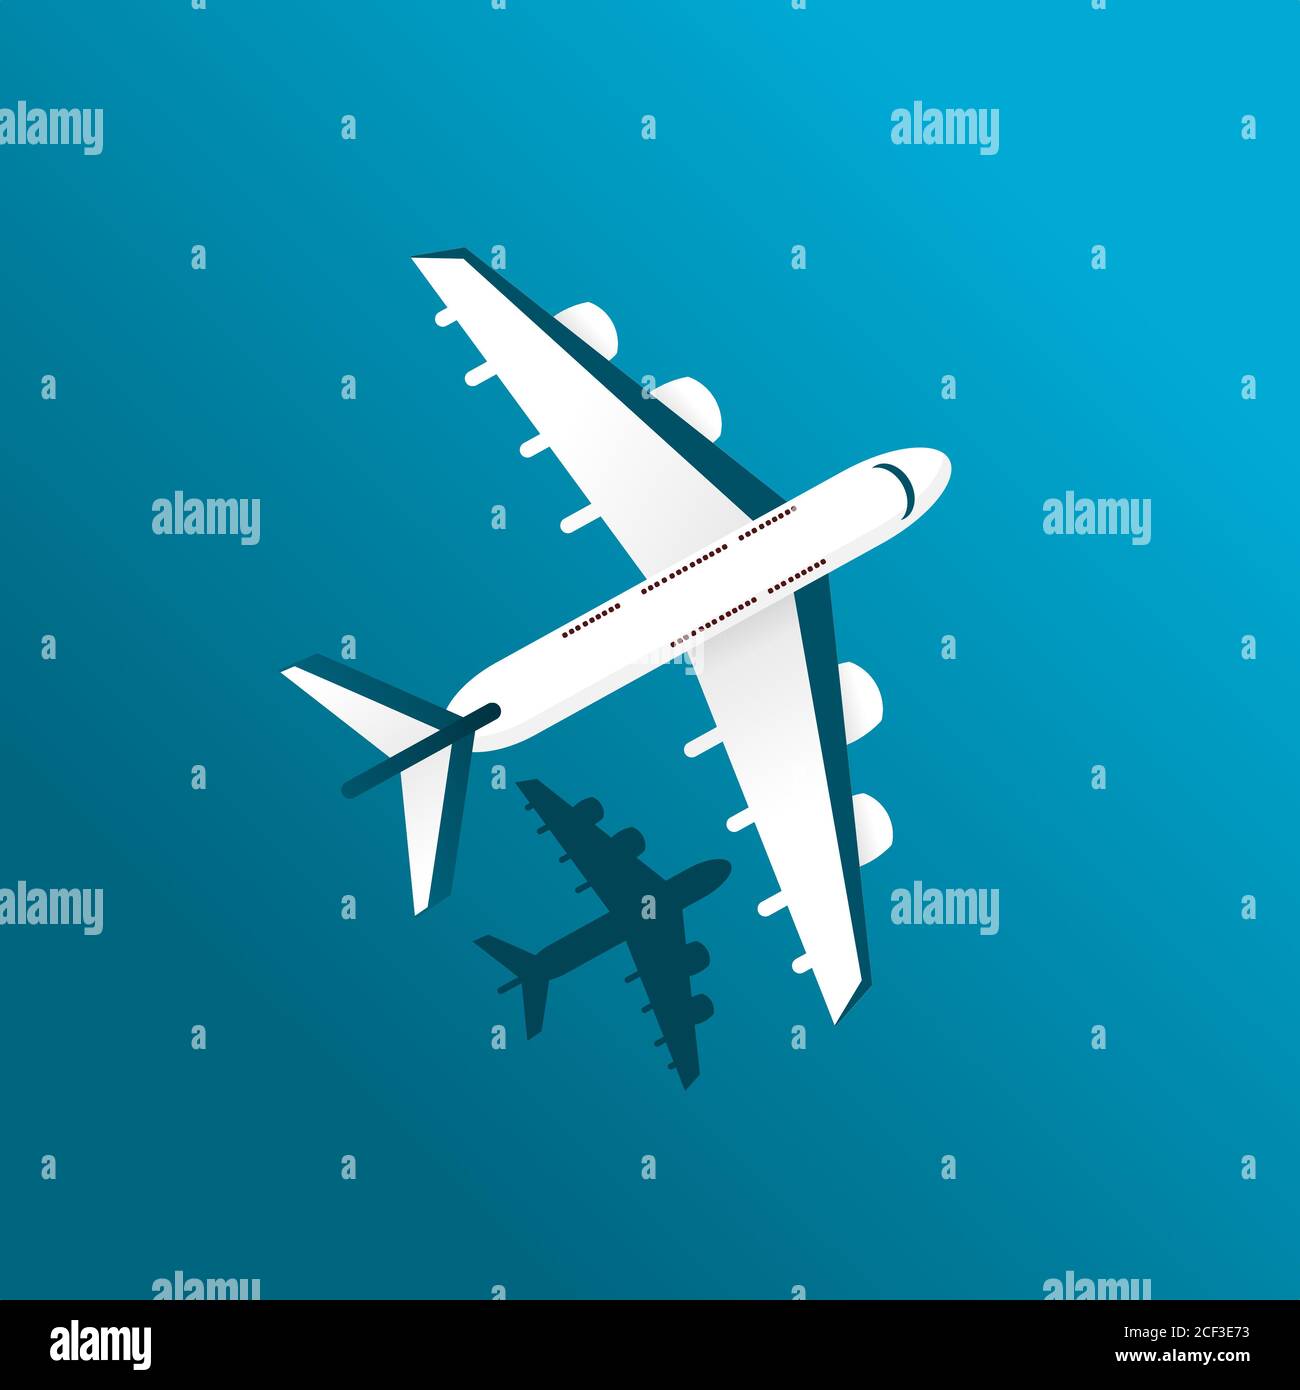 plane illustration vector, easy editable, additional image include layer by layer Stock Vector